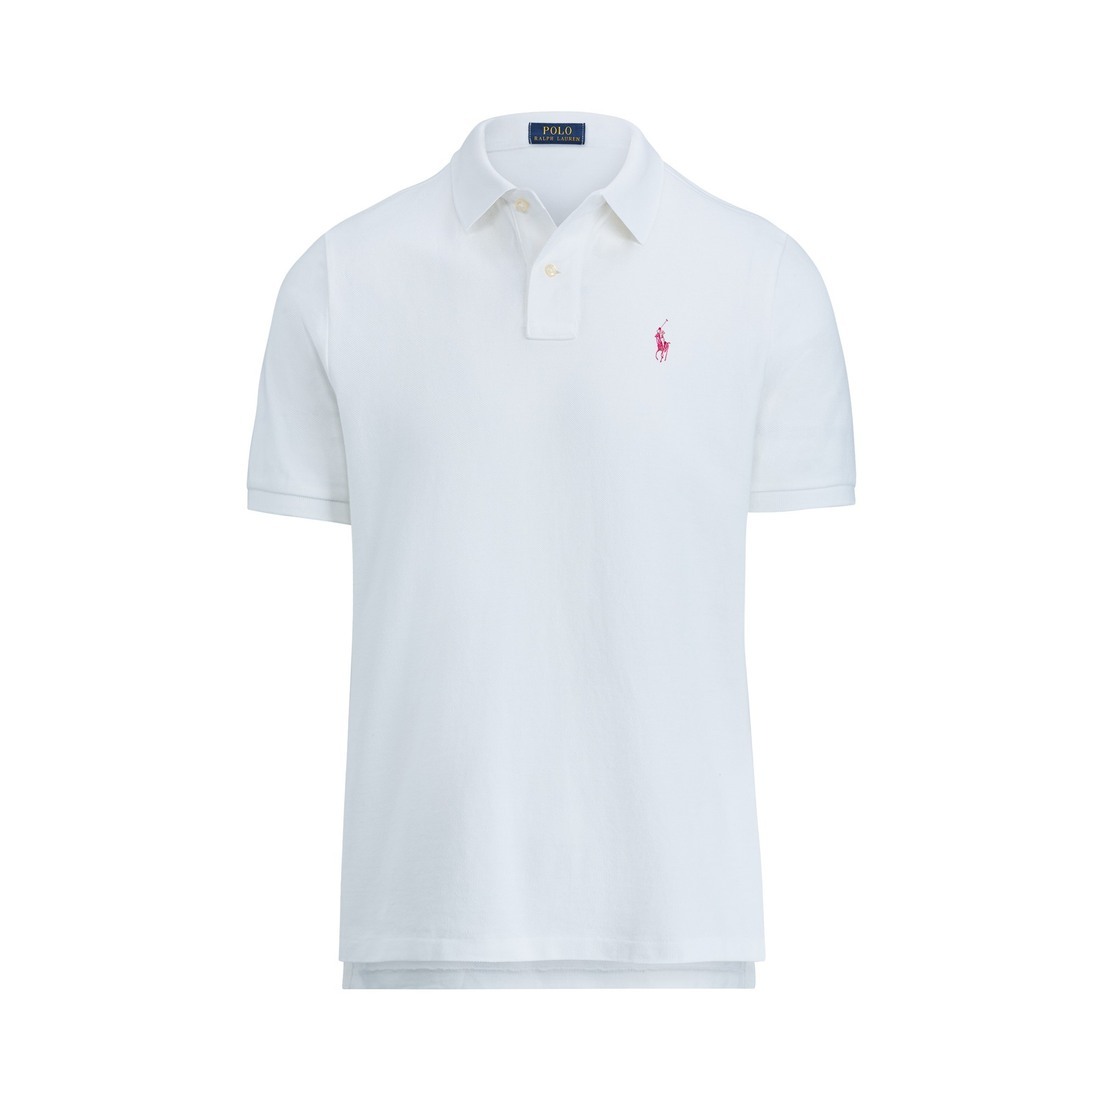 Mens T-shirts N°21 T-shirts N°21 Cotton Polo Shirt in White for Men 